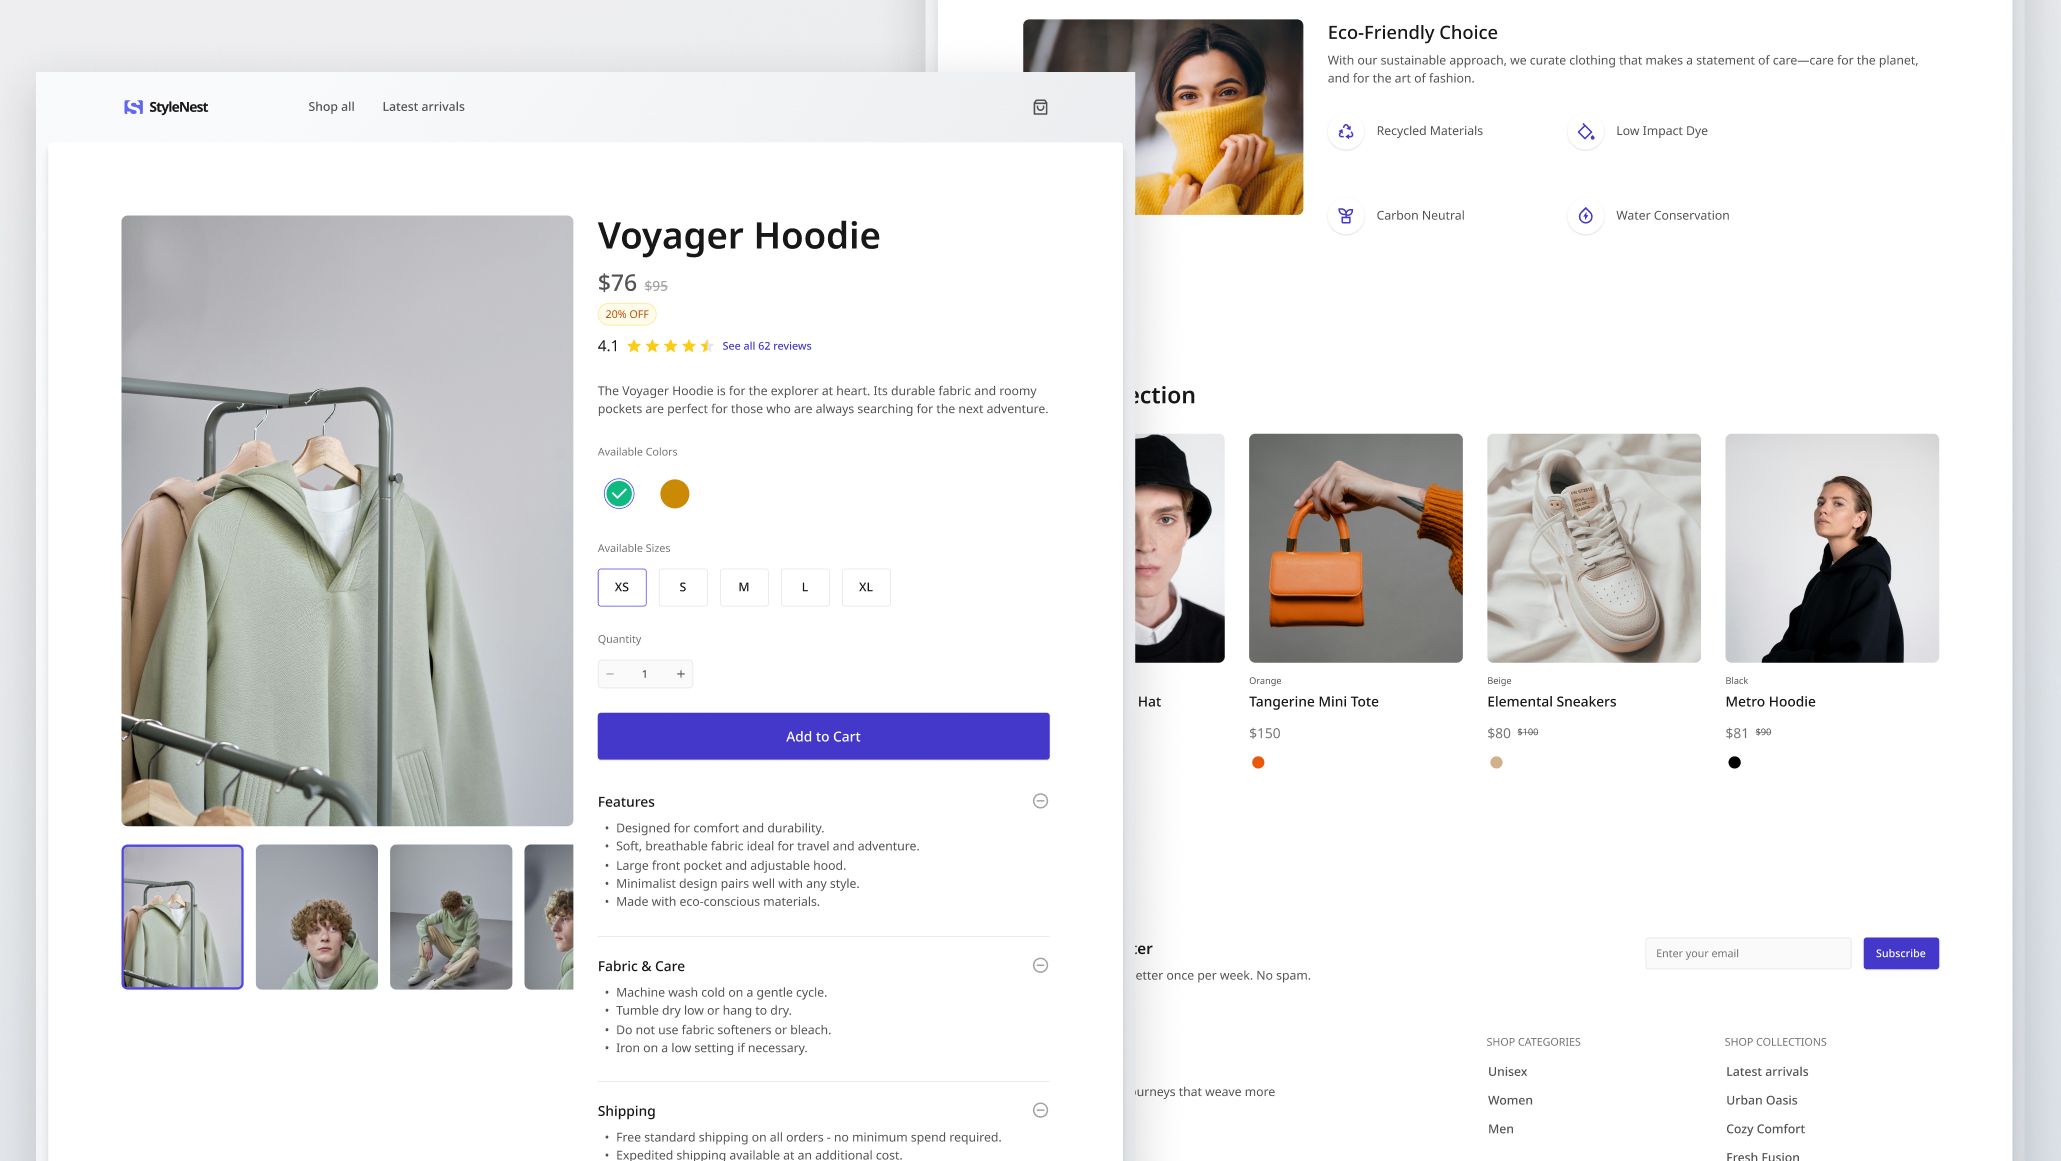 Product Details Page